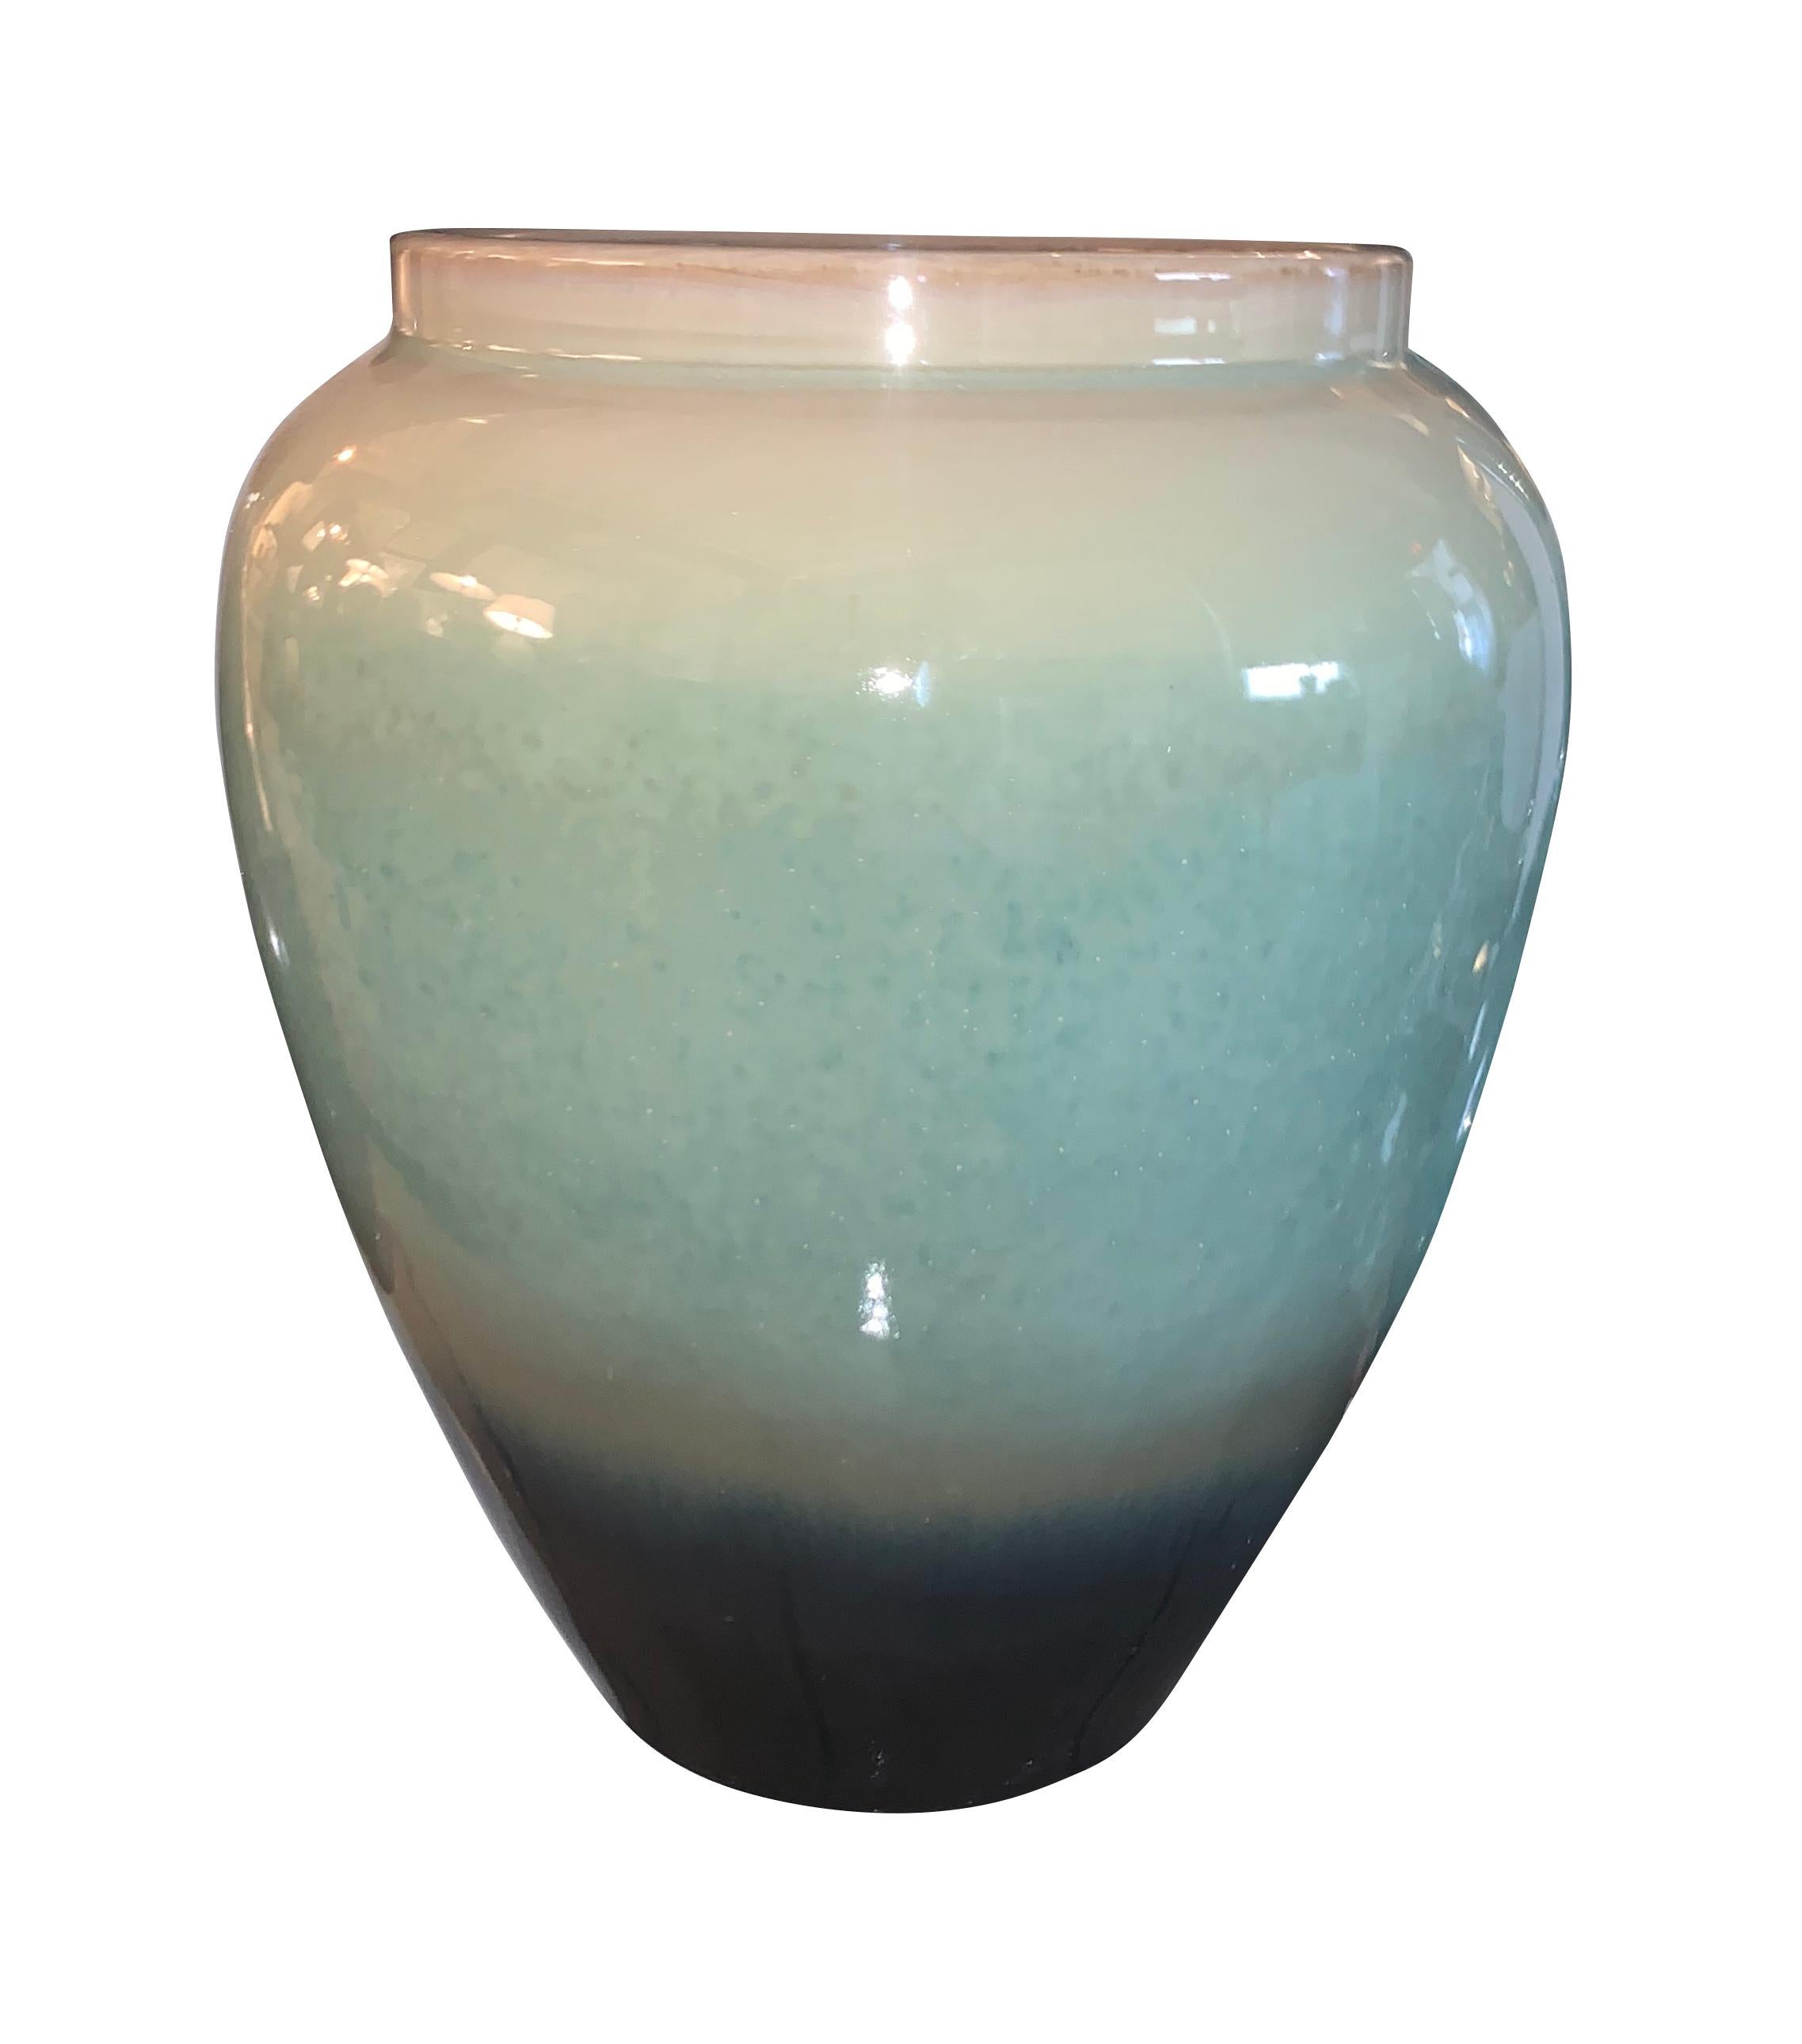 Contemporary Chinese ceramic vase with graded shades of turquoise color way.